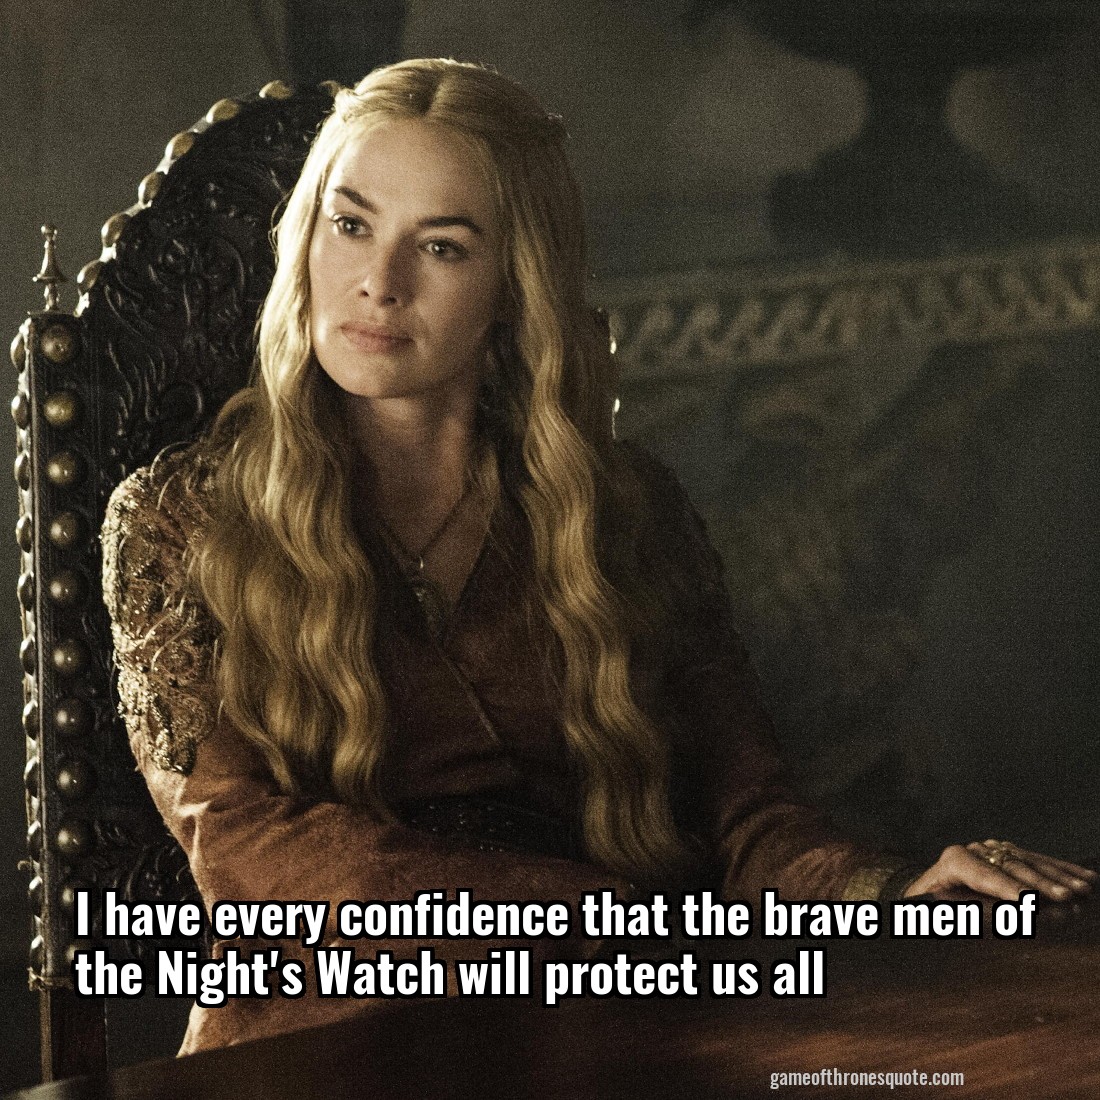 I have every confidence that the brave men of the Night's Watch will protect us all